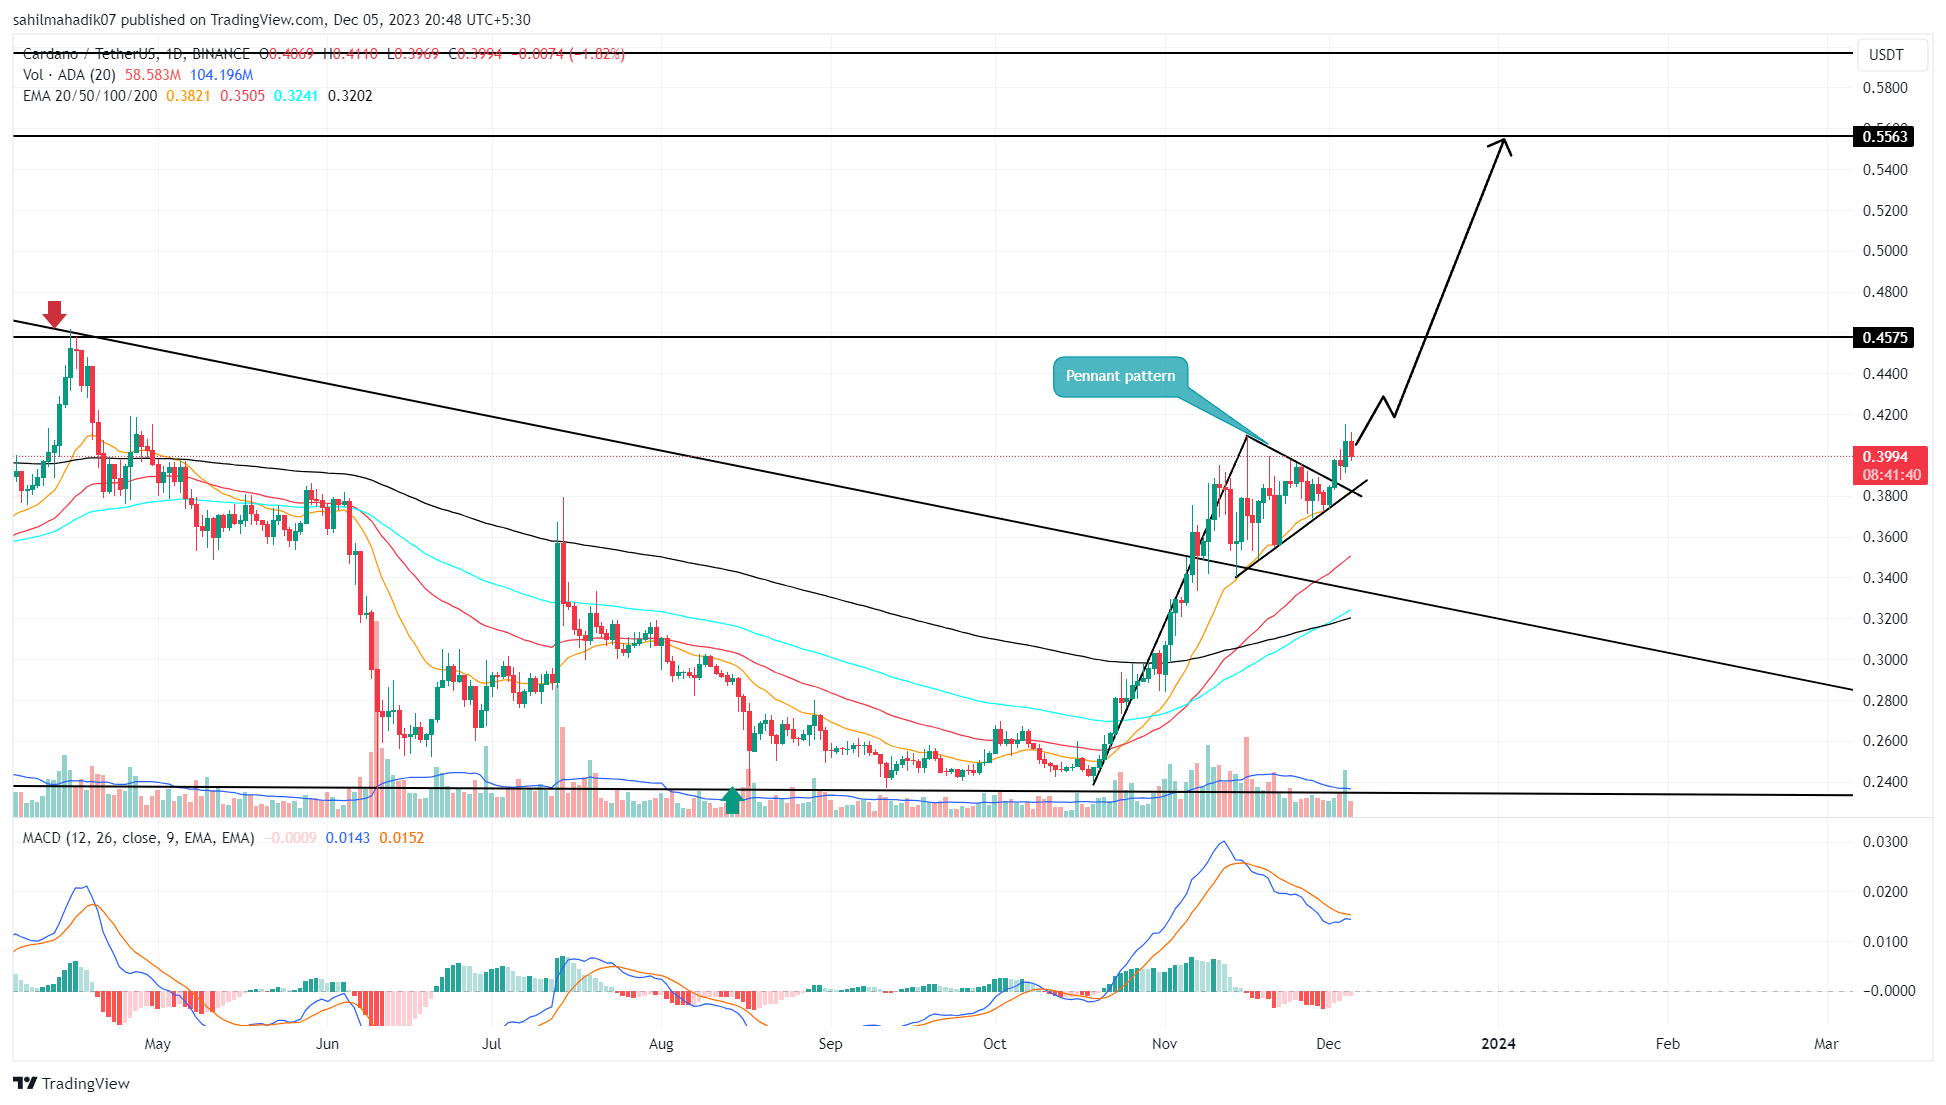 Cardano (ADA) Faces Trading Decline and Whales Lose Interest Amid Bearish Sentiment